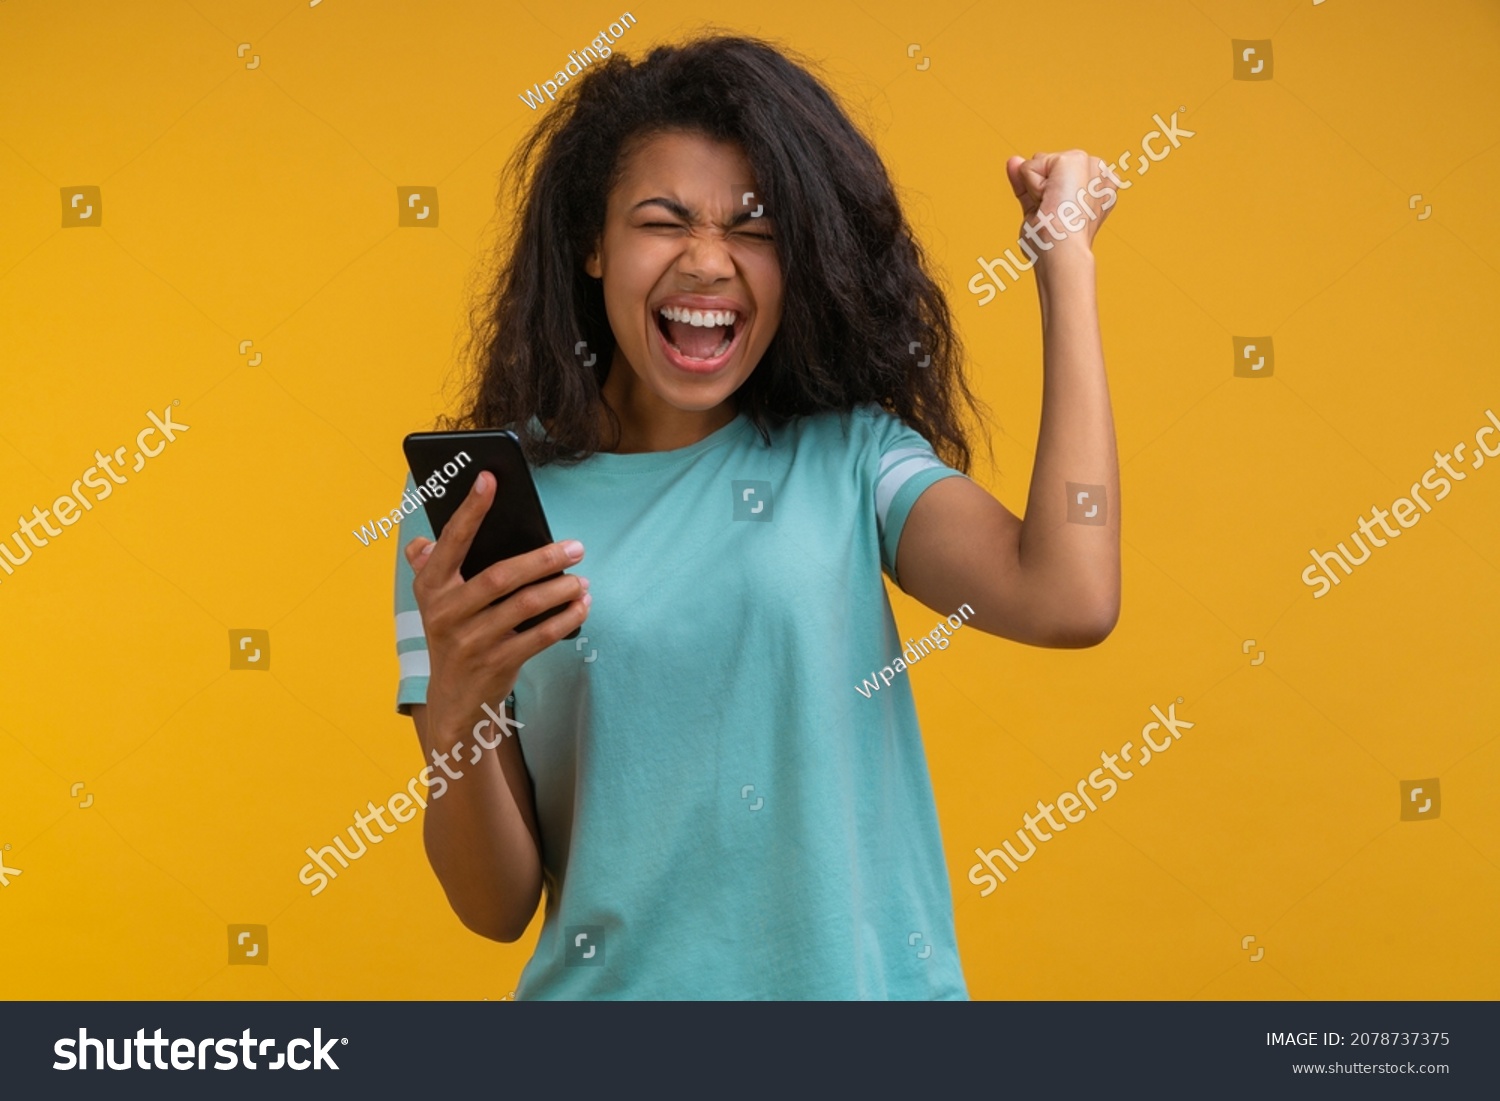 Excited soccer fan girl cheering for favourite team and making winner gesture with her fist being happy about the score. Young woman showing sincere excitement about the victory in online lottery.  #2078737375